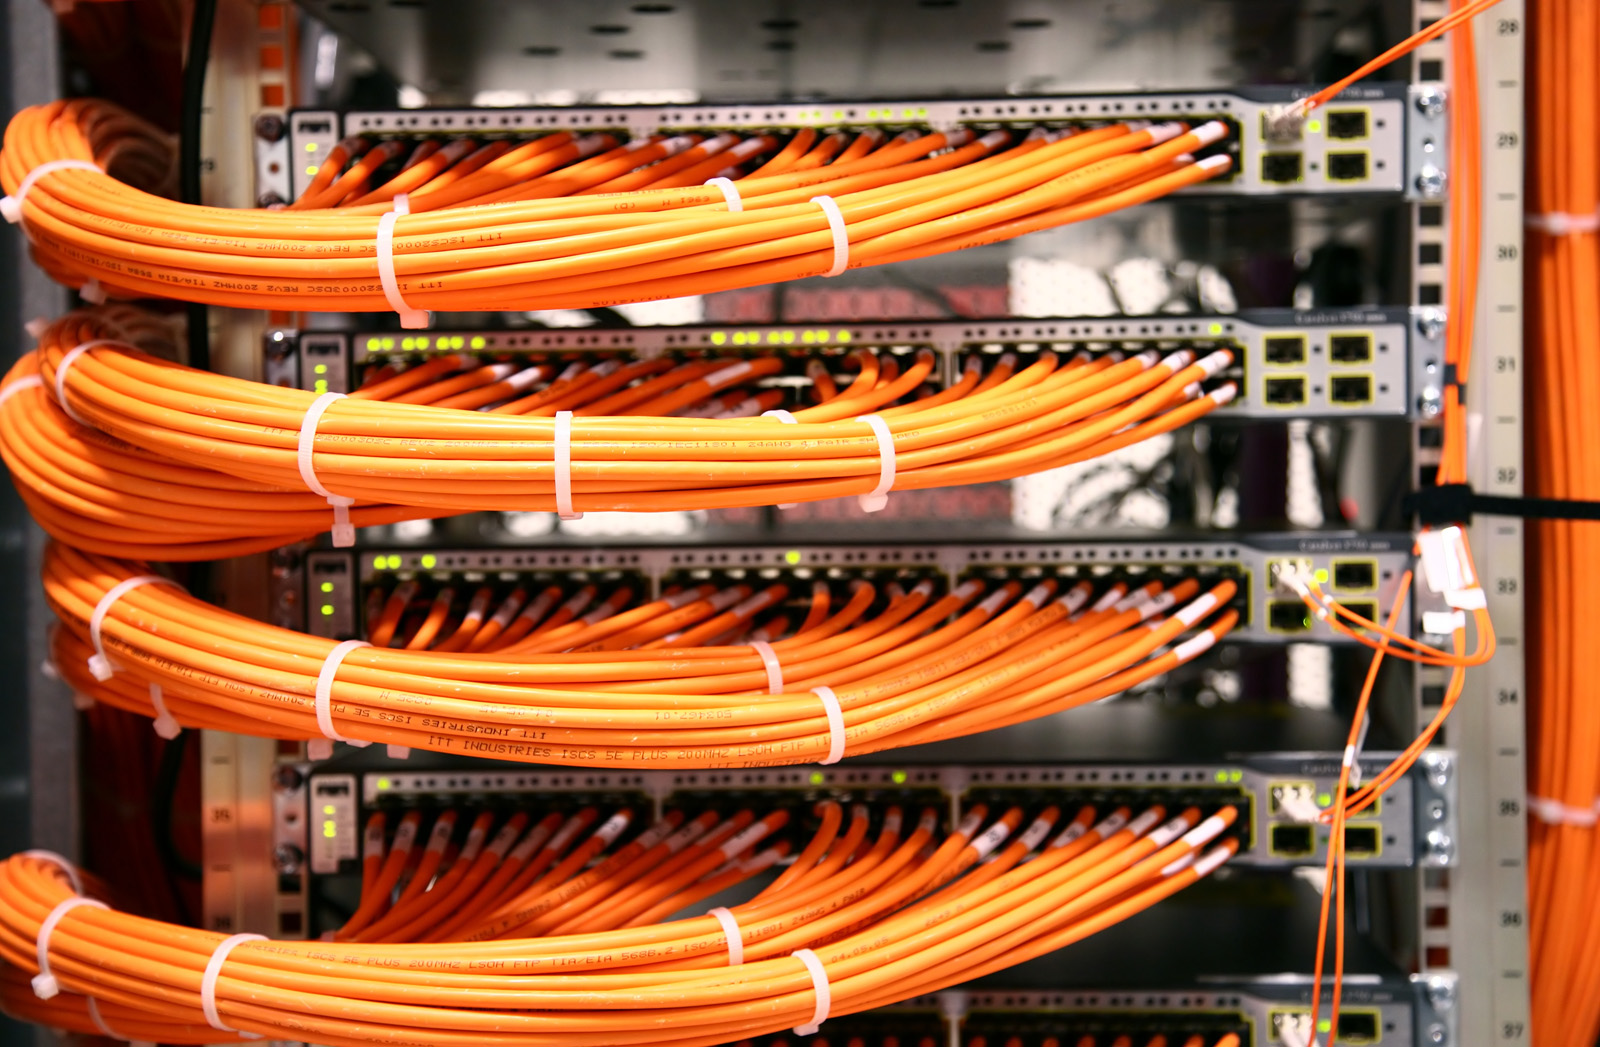 Andalusia Alabama Pro Voice & Data Network Cabling Solutions Provider